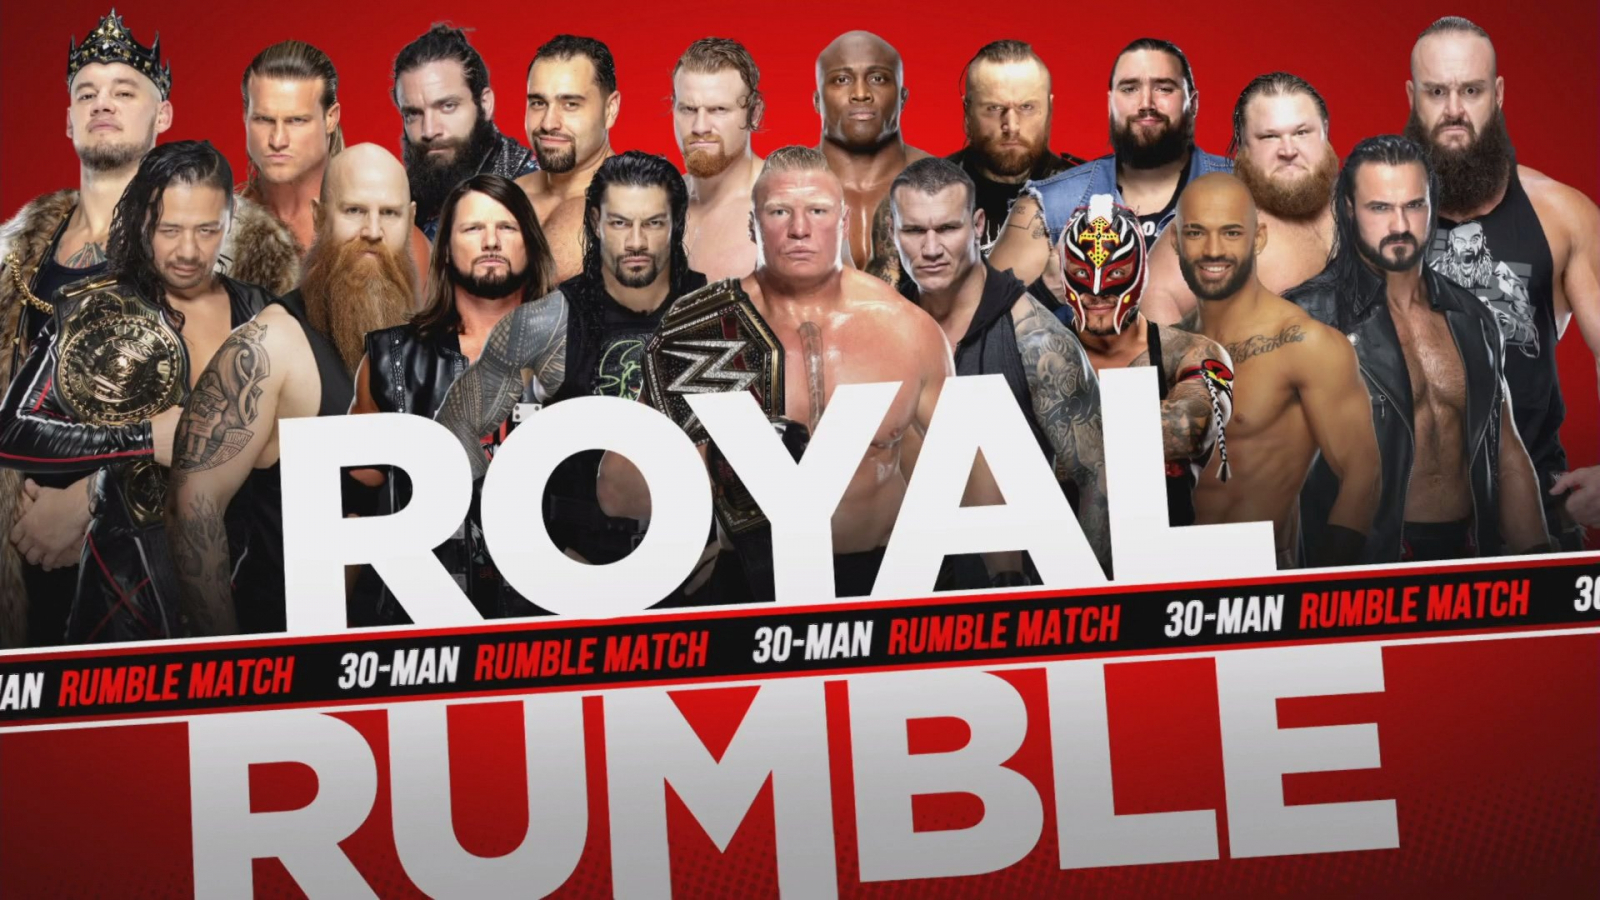 Royal Rumble 2020 Here is the updated match card and participants of